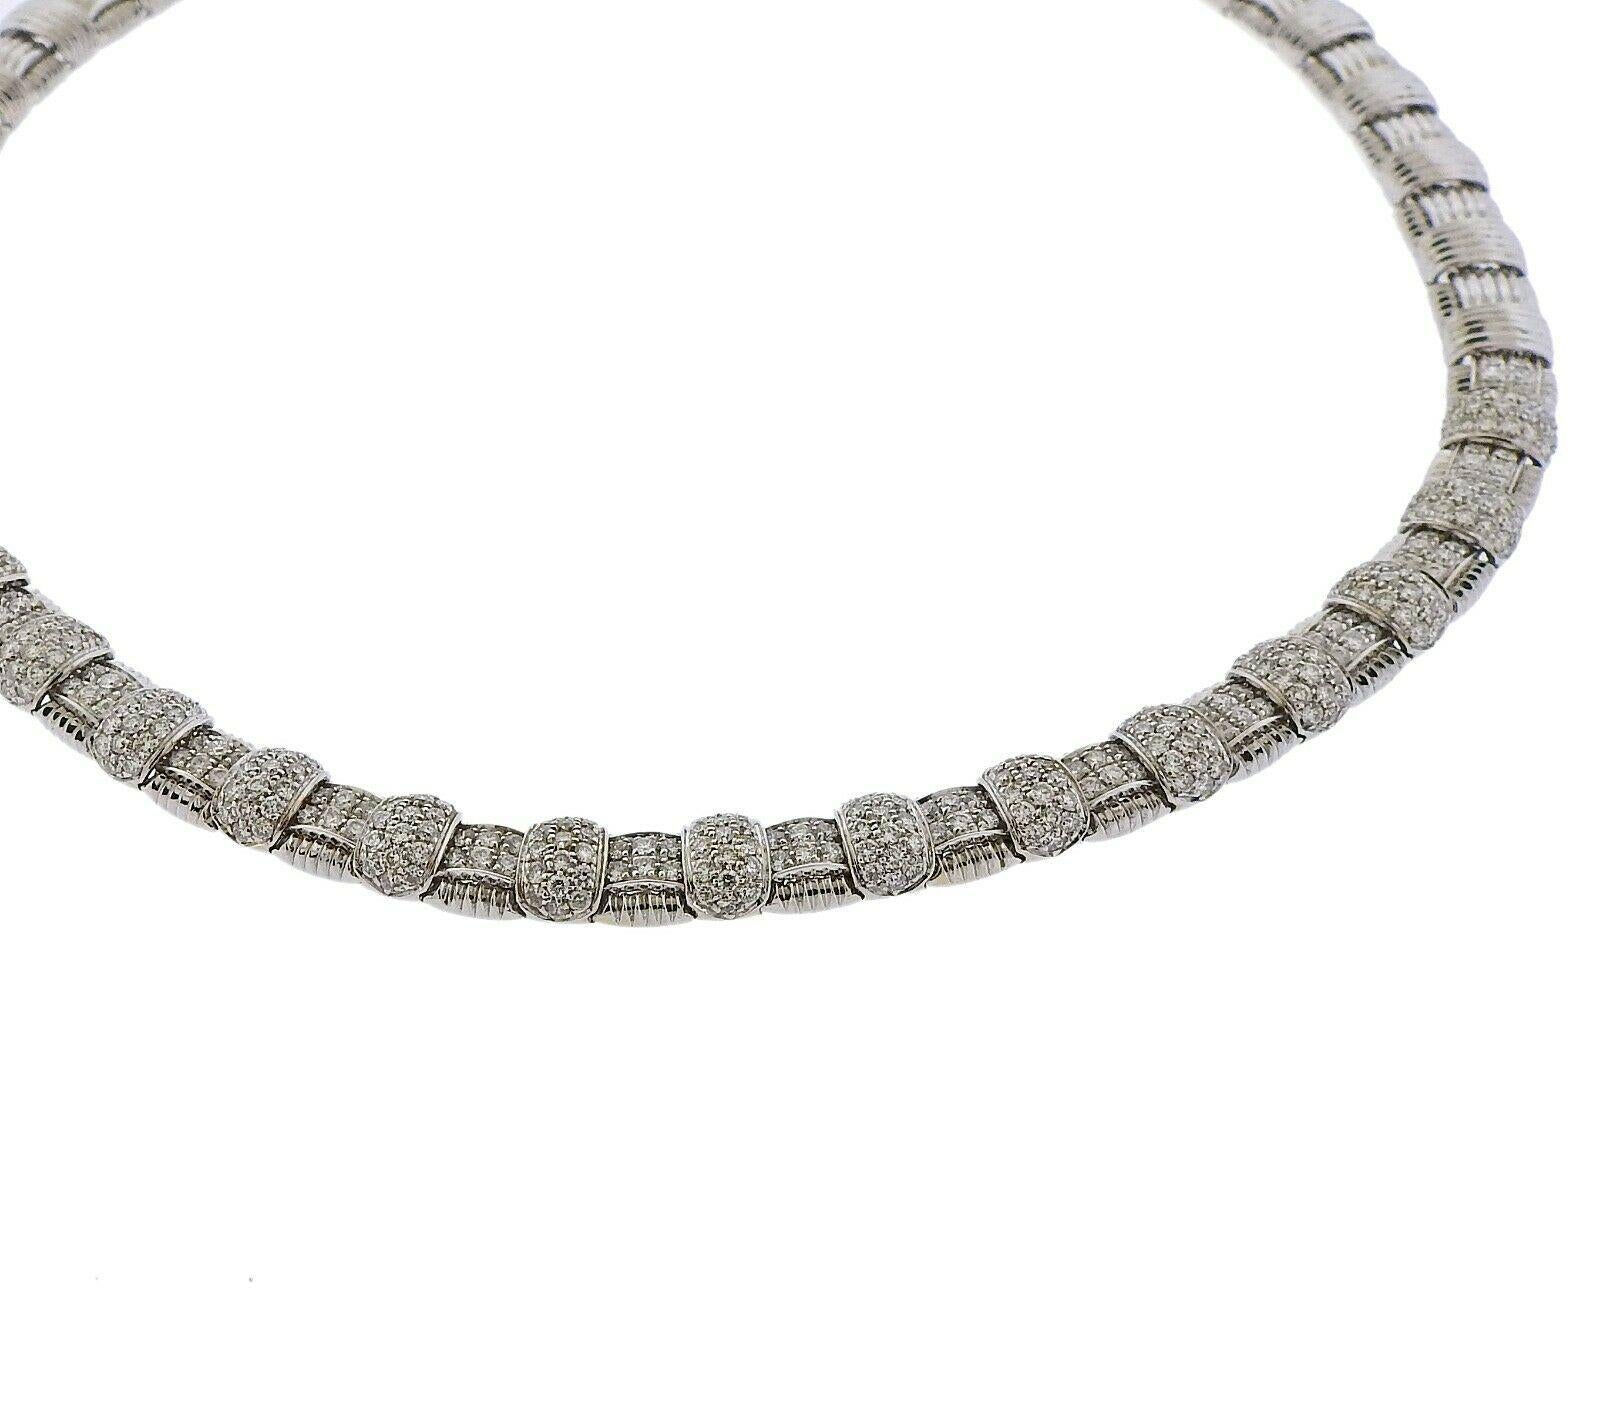 Classic Roberto Coin Appassionata necklace in 18K White Gold. Featuring 7.36ct in Diamonds: VS clarity; G color. Necklace is .16.5